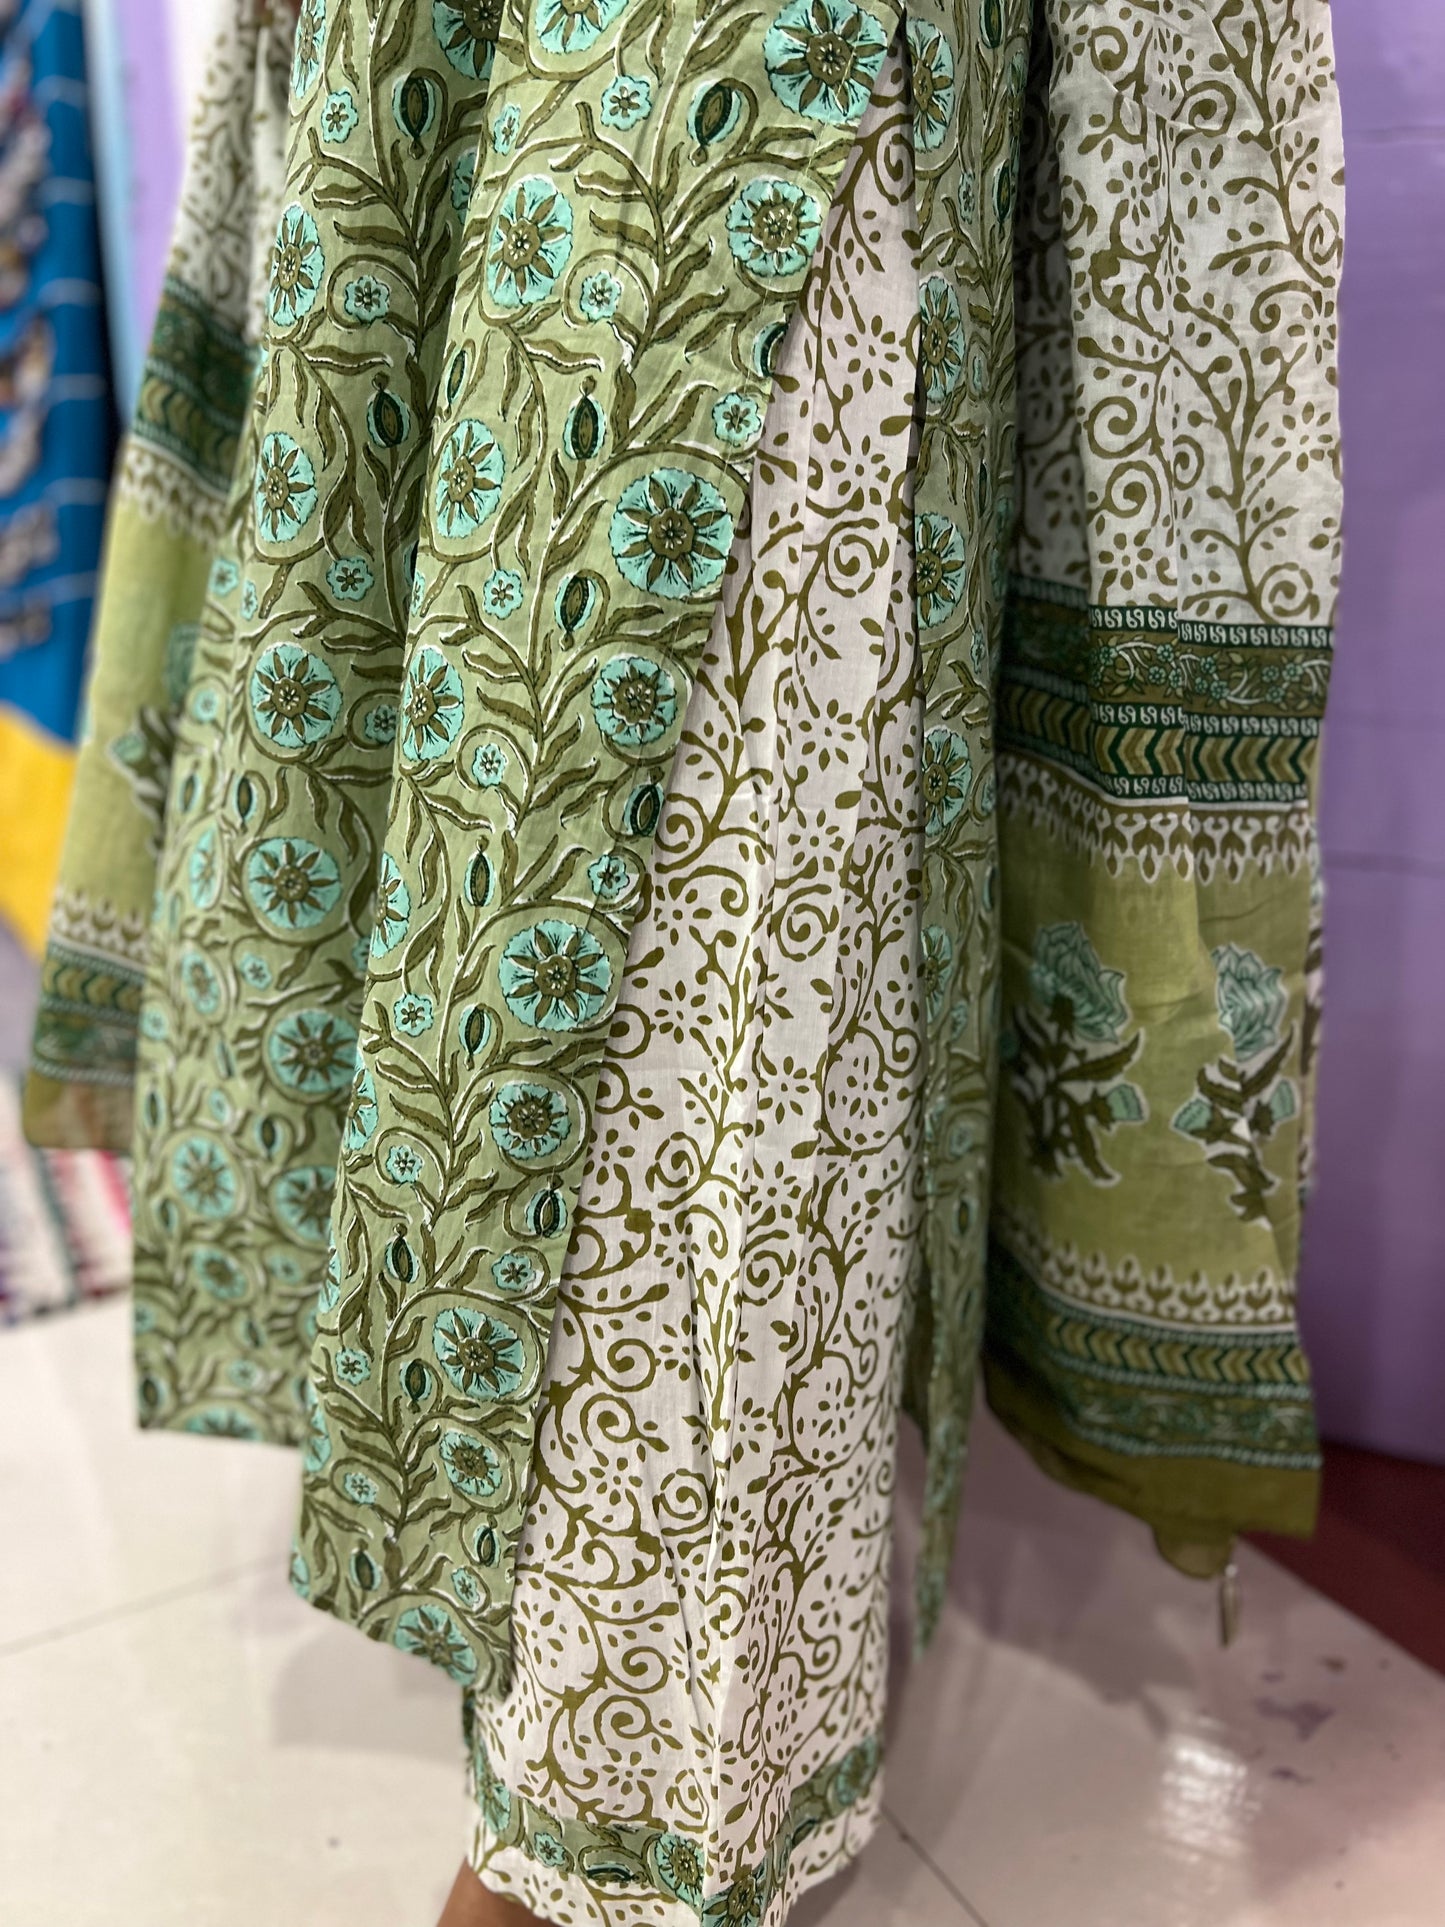 Southloom Stitched Cotton Salwar Set in Green Colour with Floral Printed Design